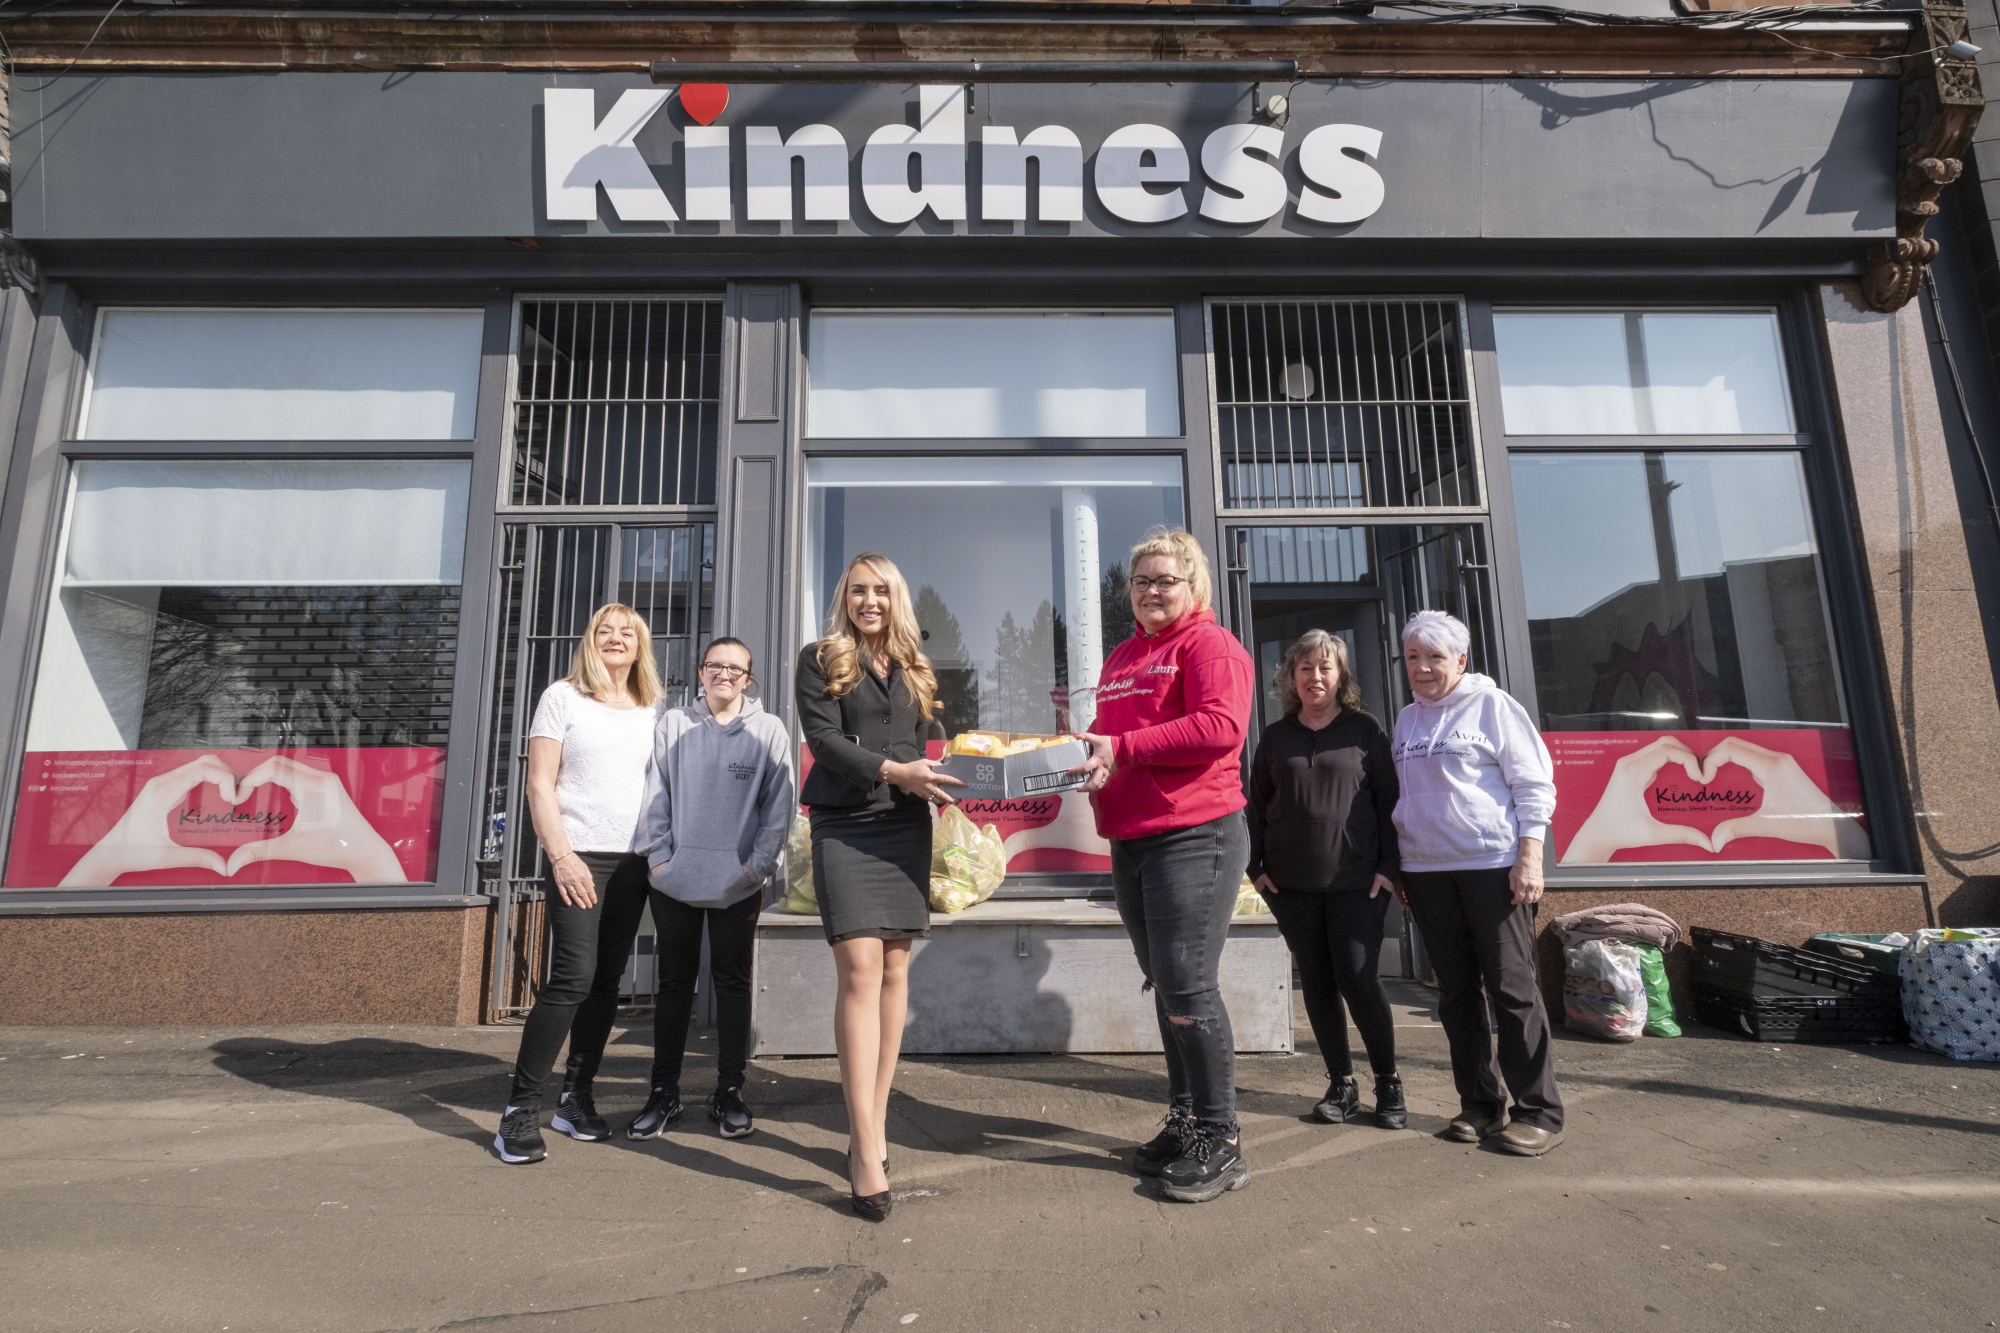 Kindness Homeless Street Team receives £1,500 from Cala Homes